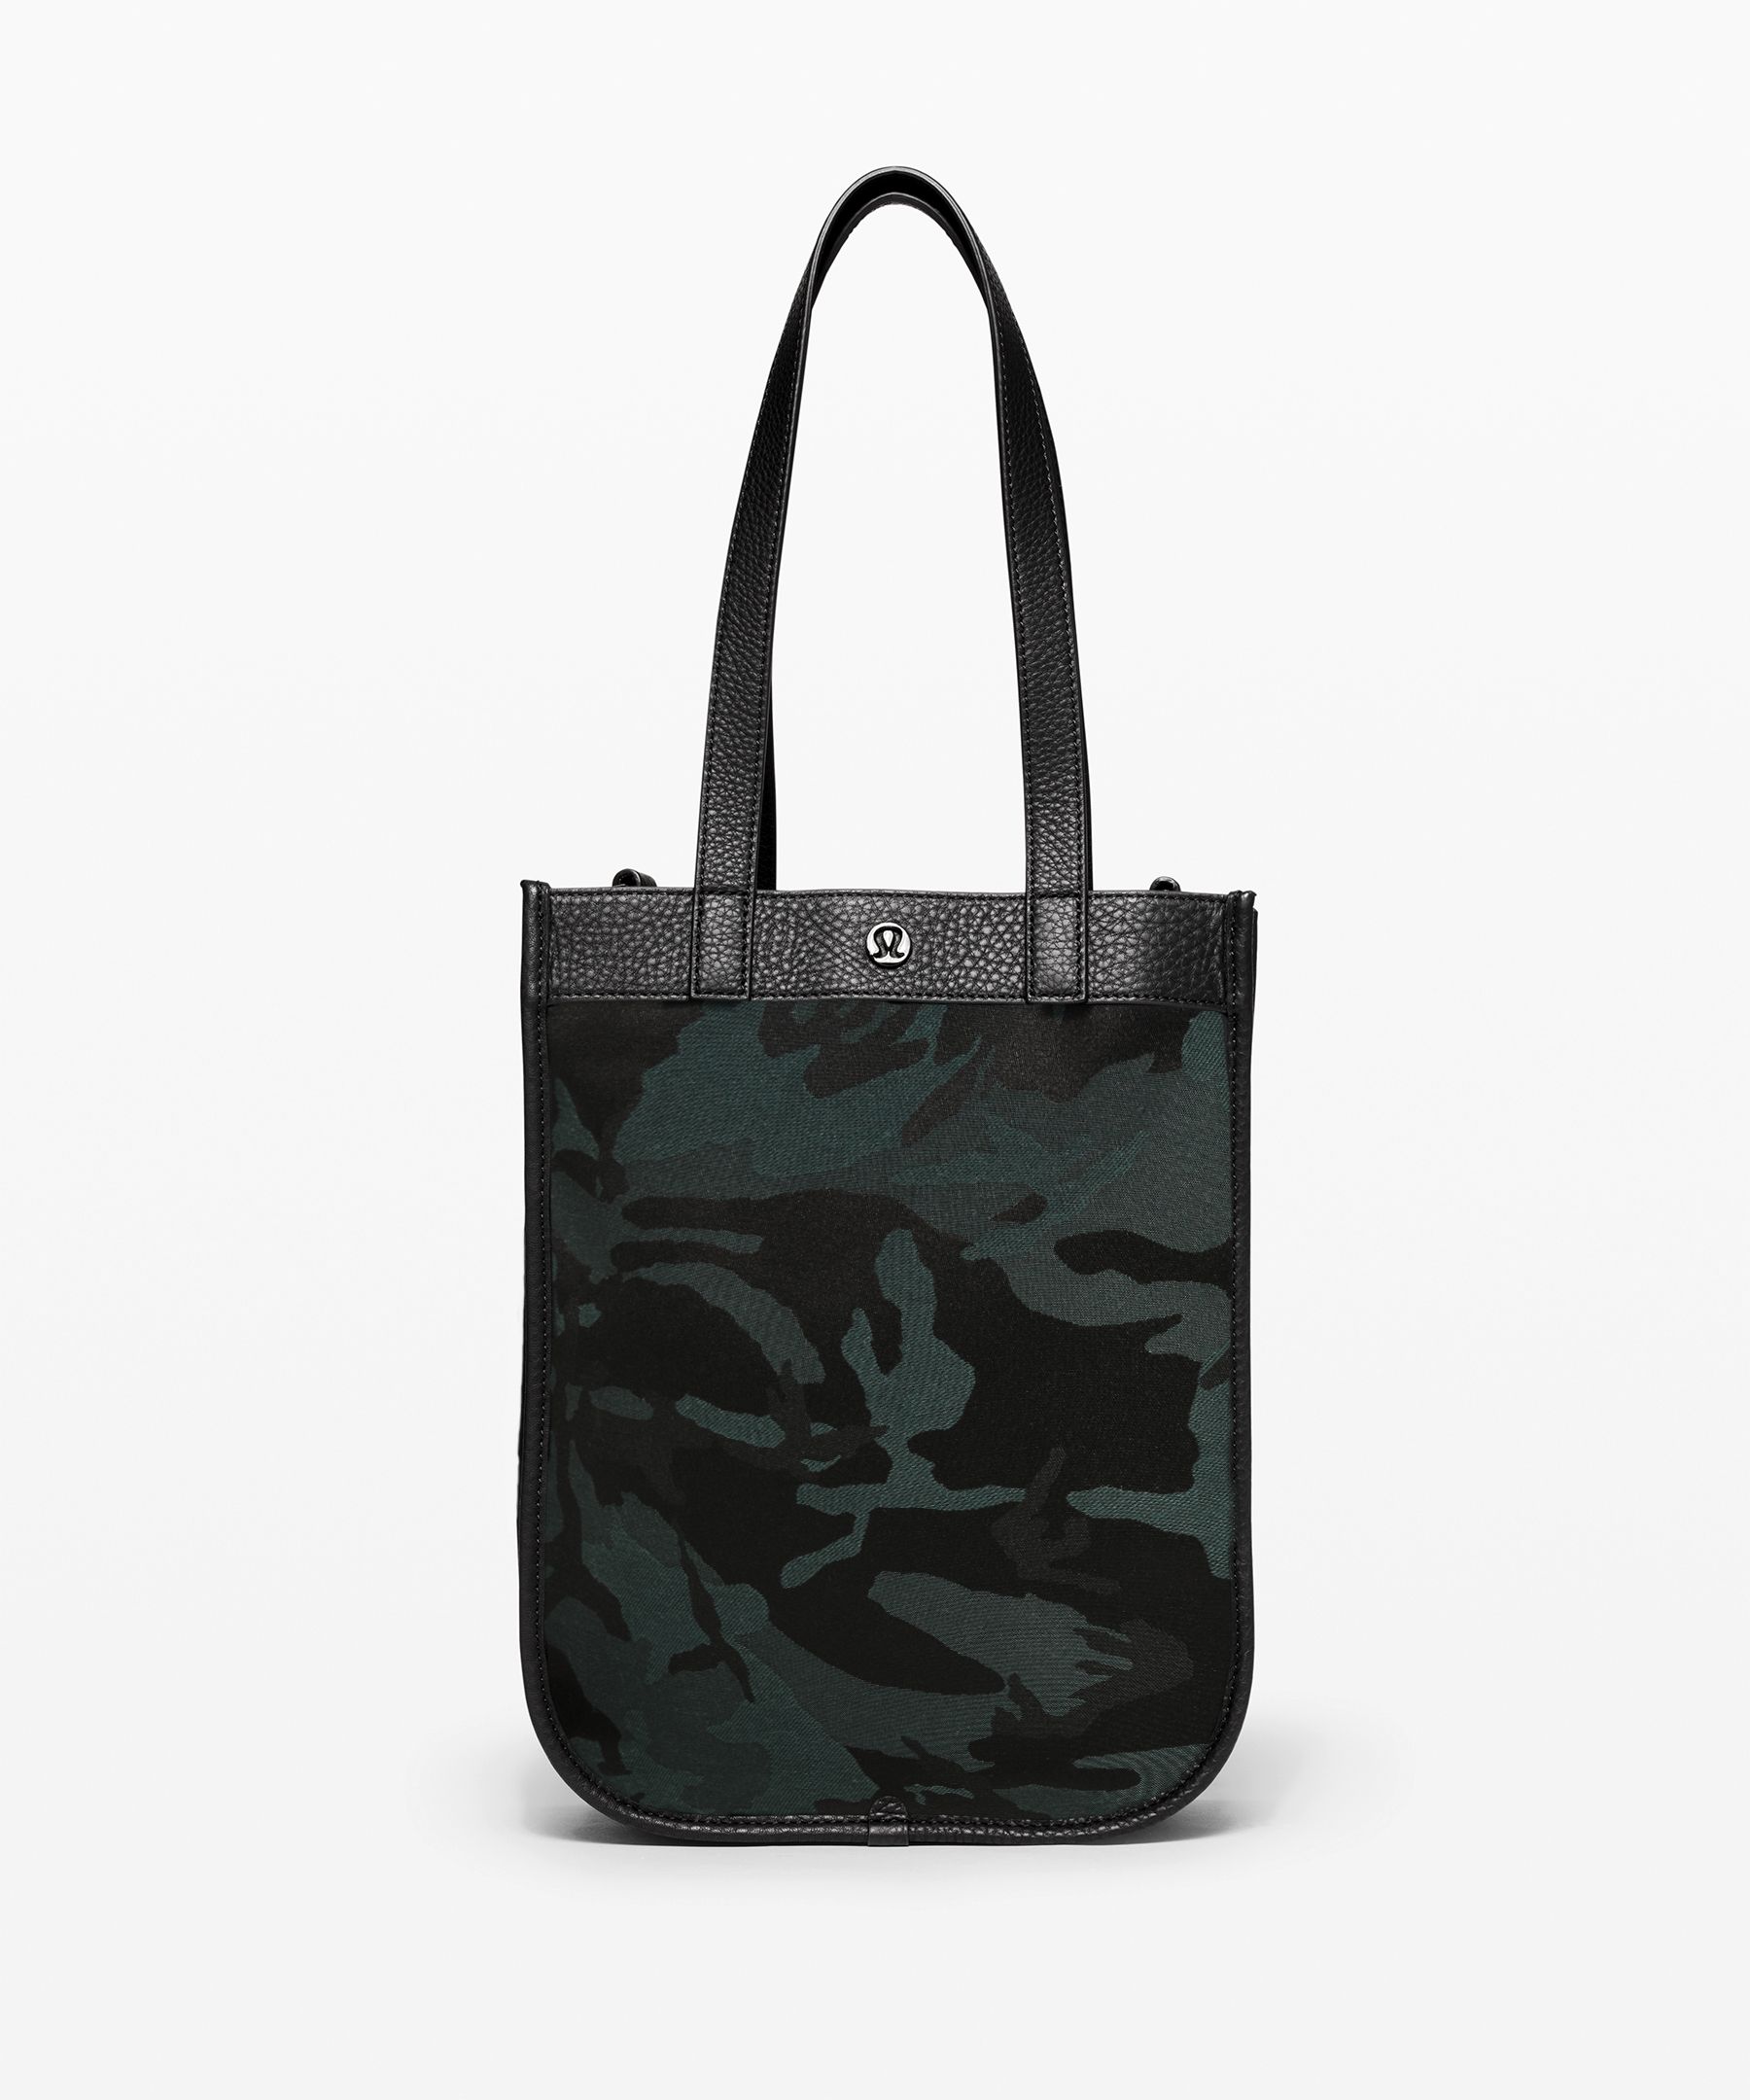 lululemon all day tote